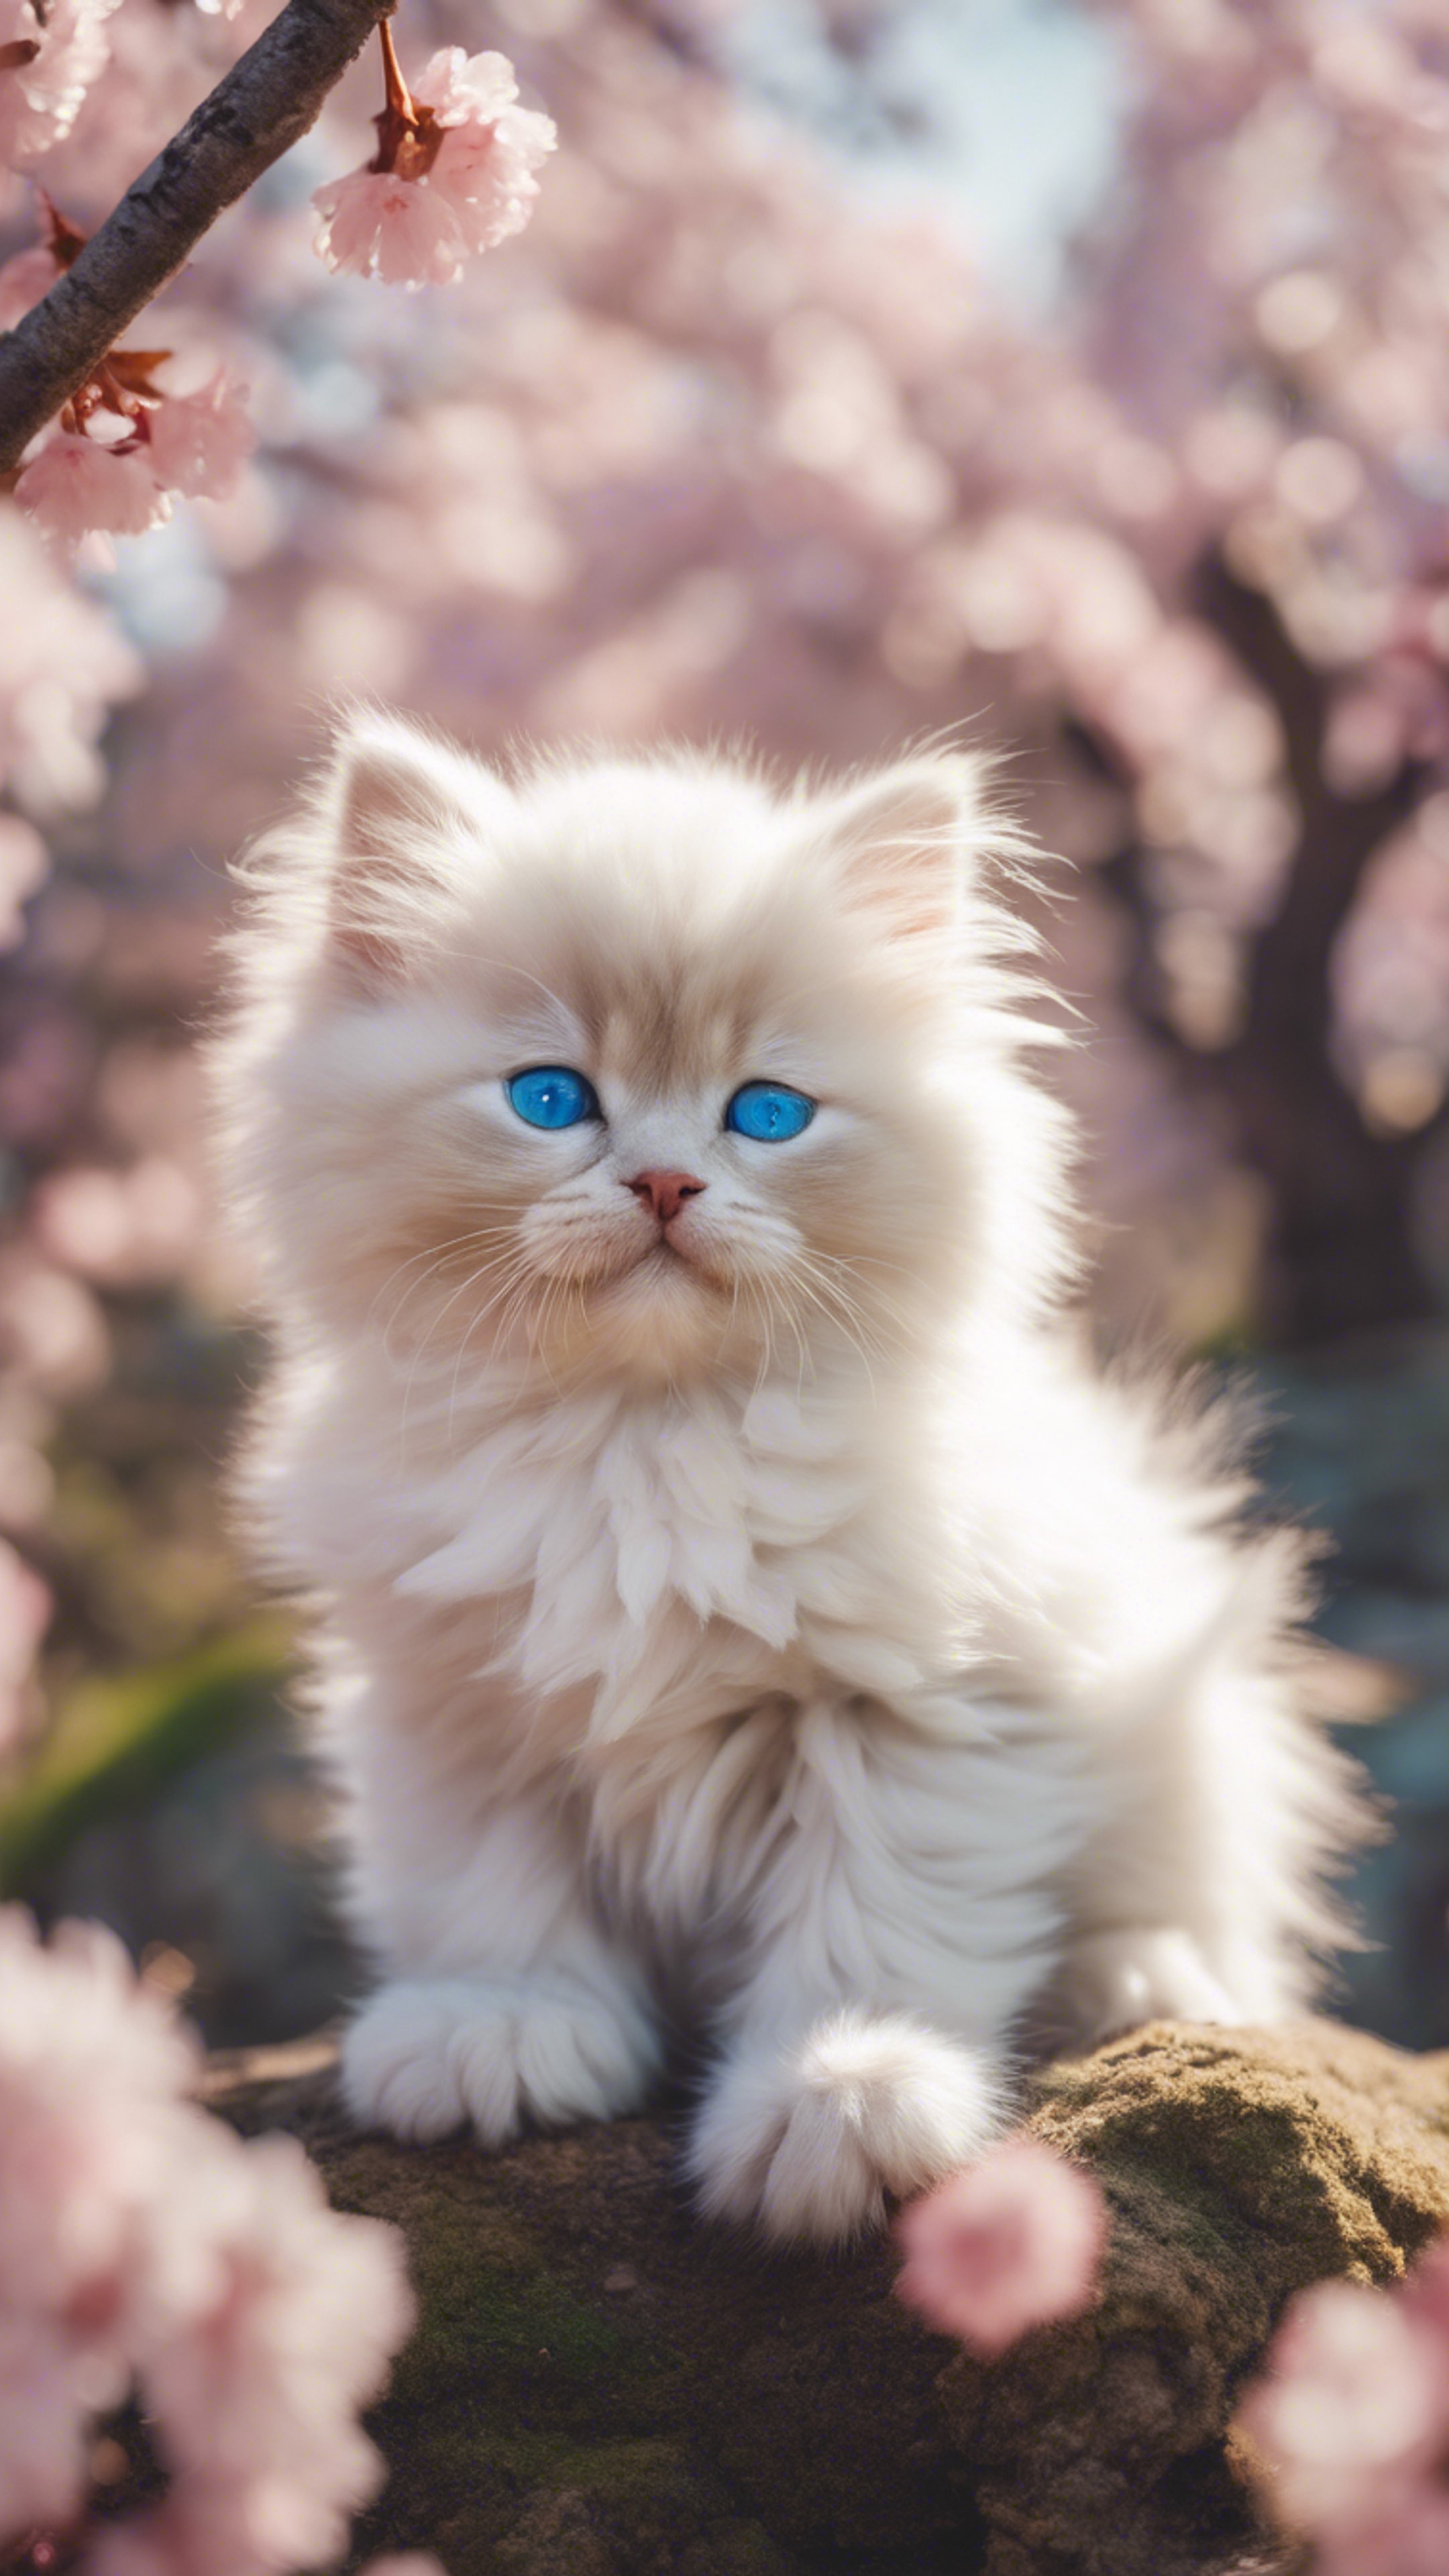 A fluffy Himalayan kitten with blue eyes, blissfully sleeping in a cherry blossom-filled Japanese garden in springtime. Fond d'écran[7574b48ca53a4fd7b91a]